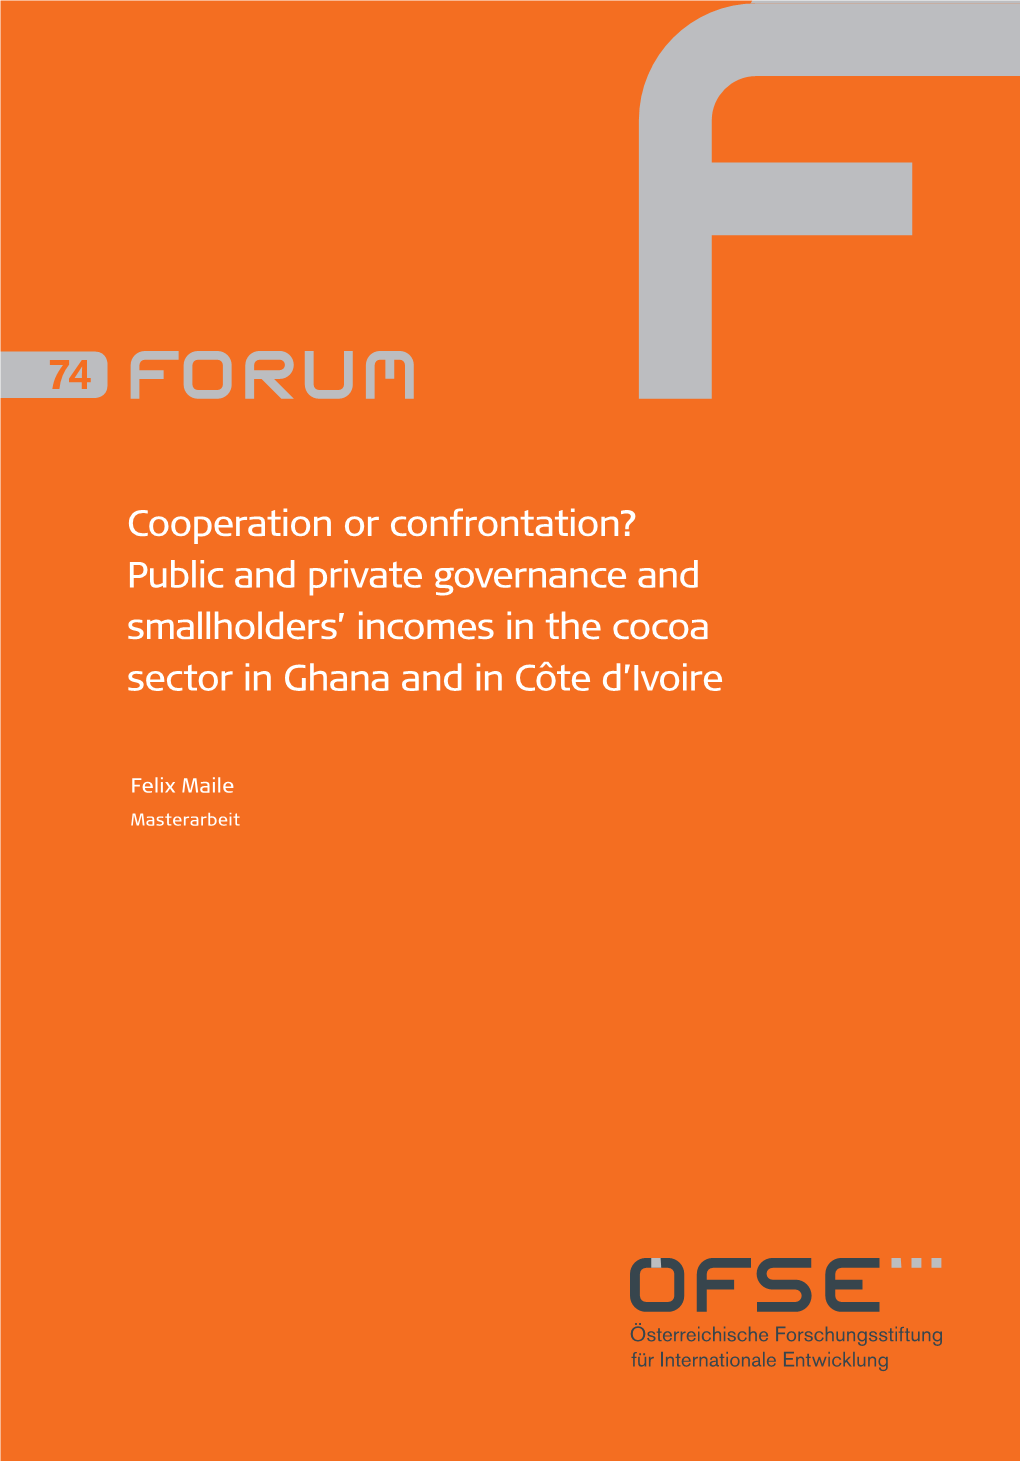 Cooperation Or Confrontation? Public and Private Governance and Smallholders' Incomes in the Cocoa Sector in Ghana and In